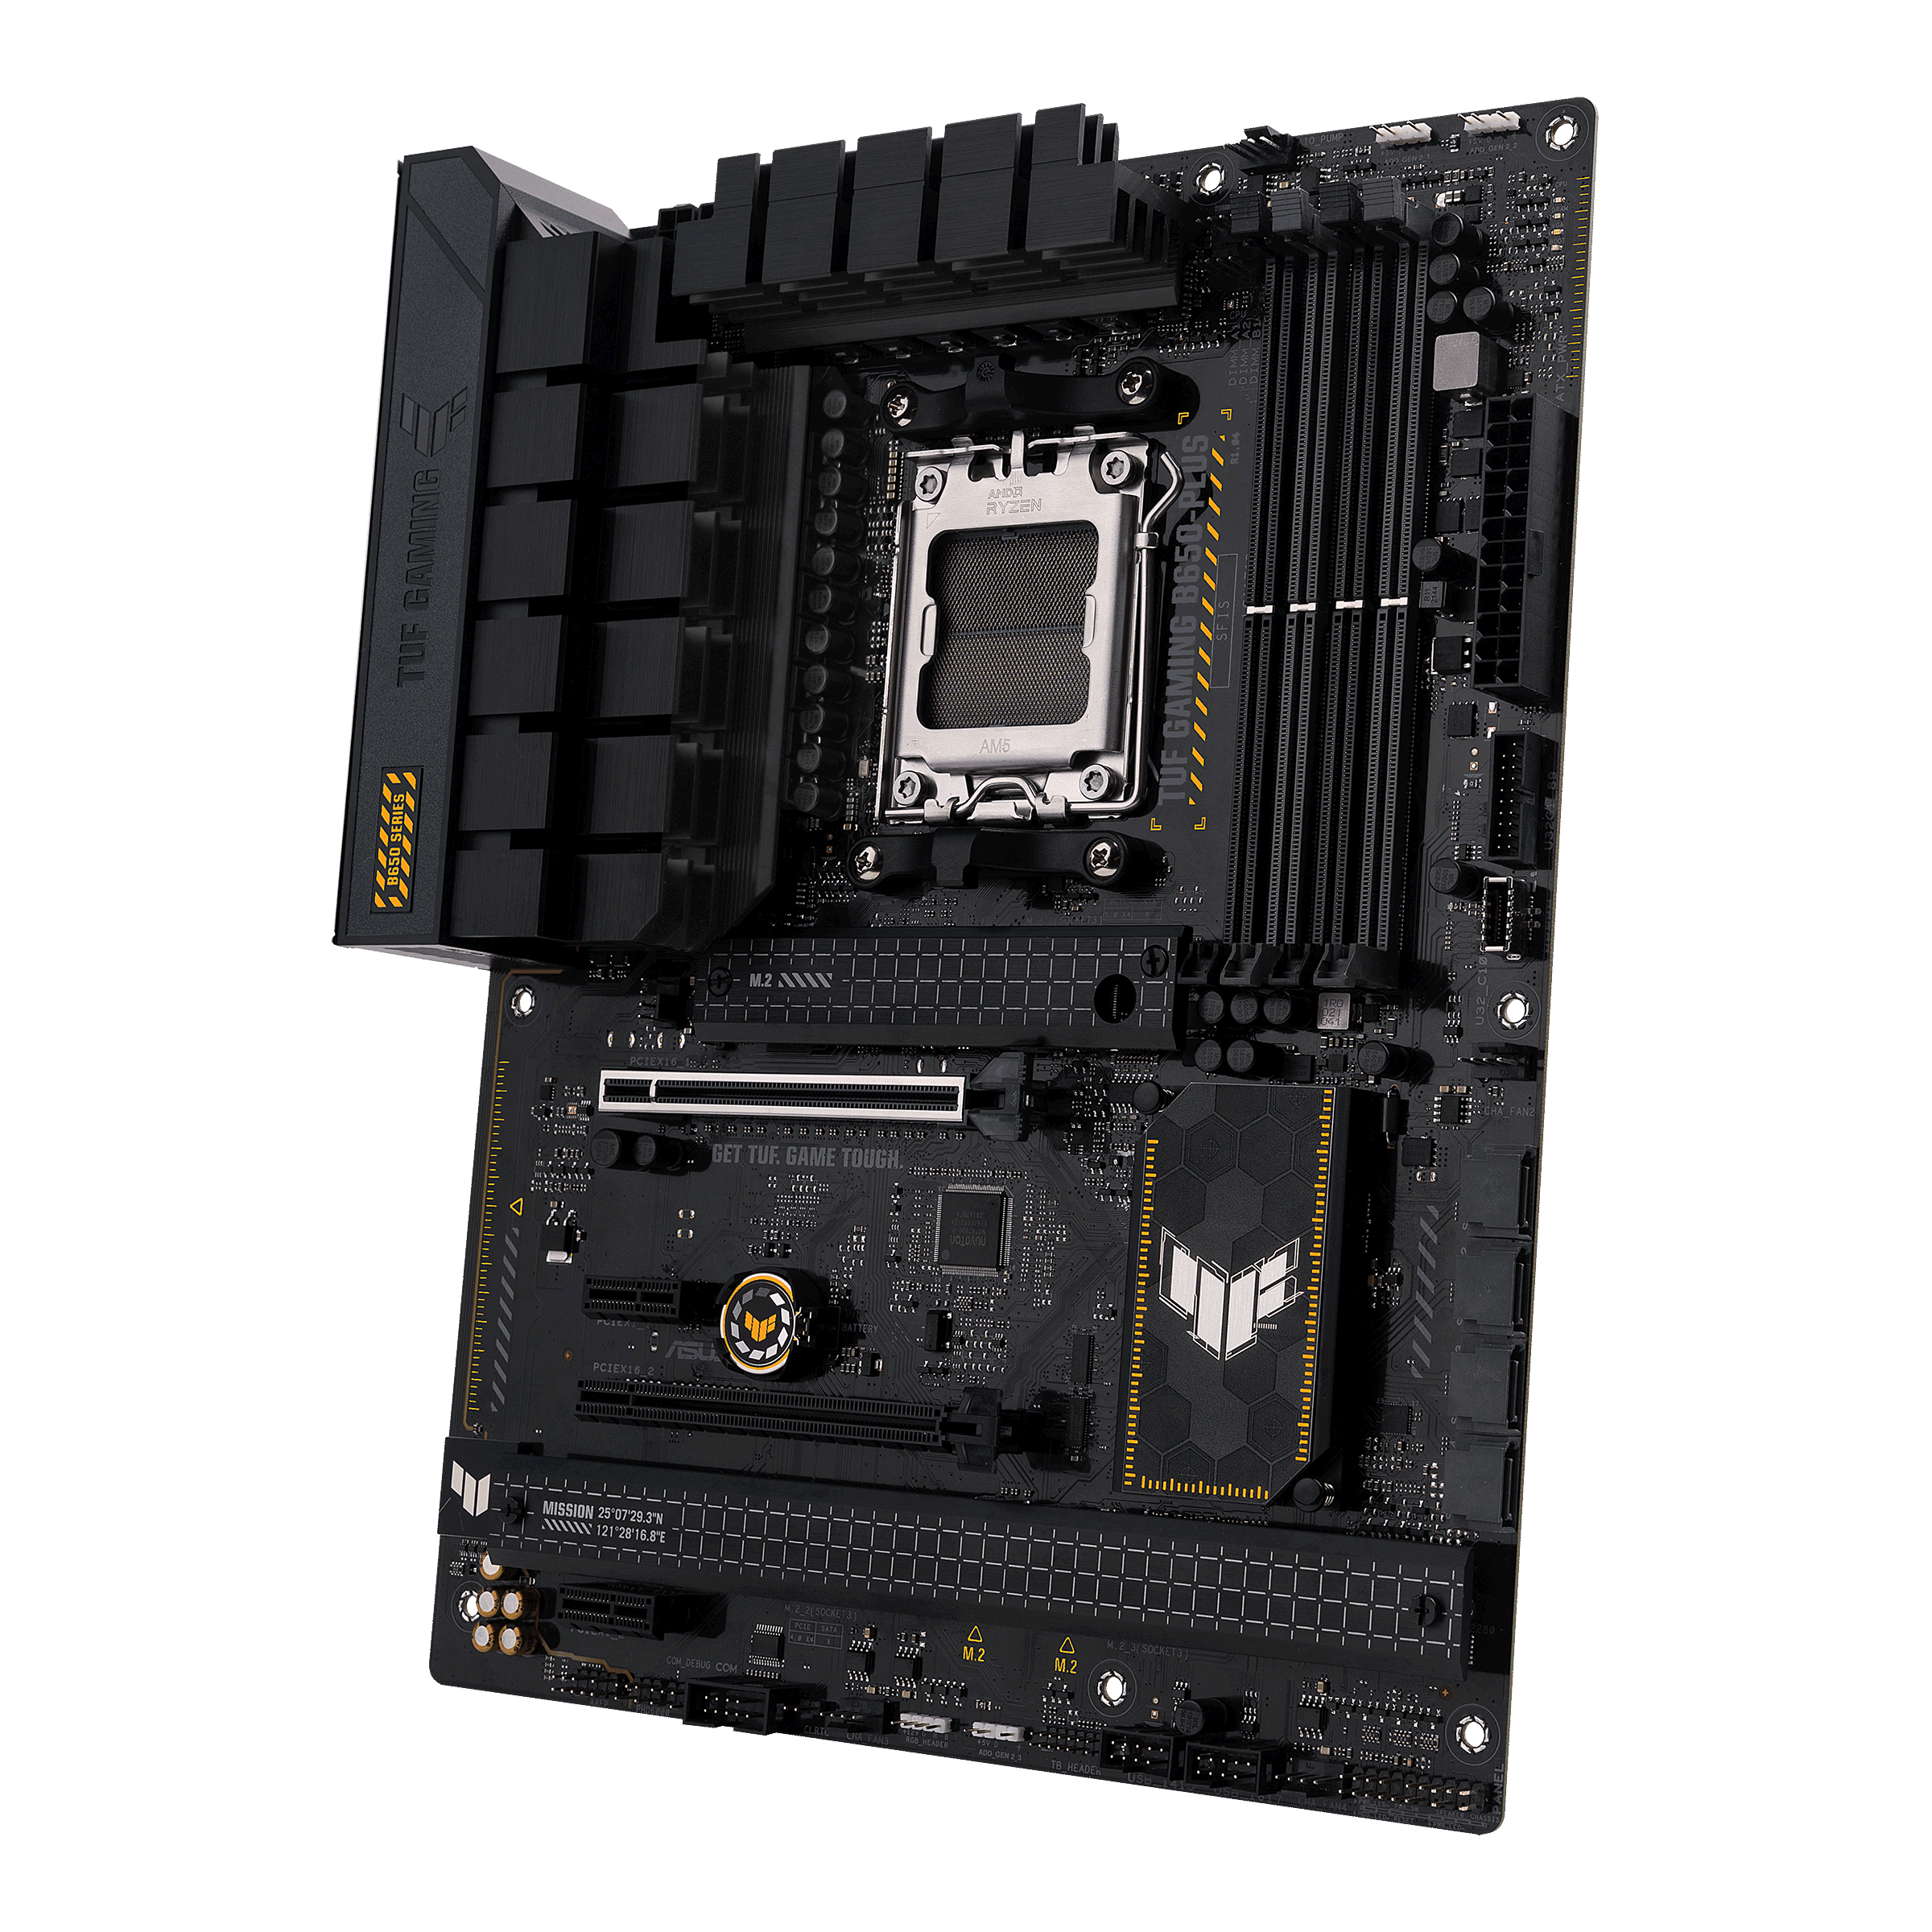 TUF Gaming motherboard's photo